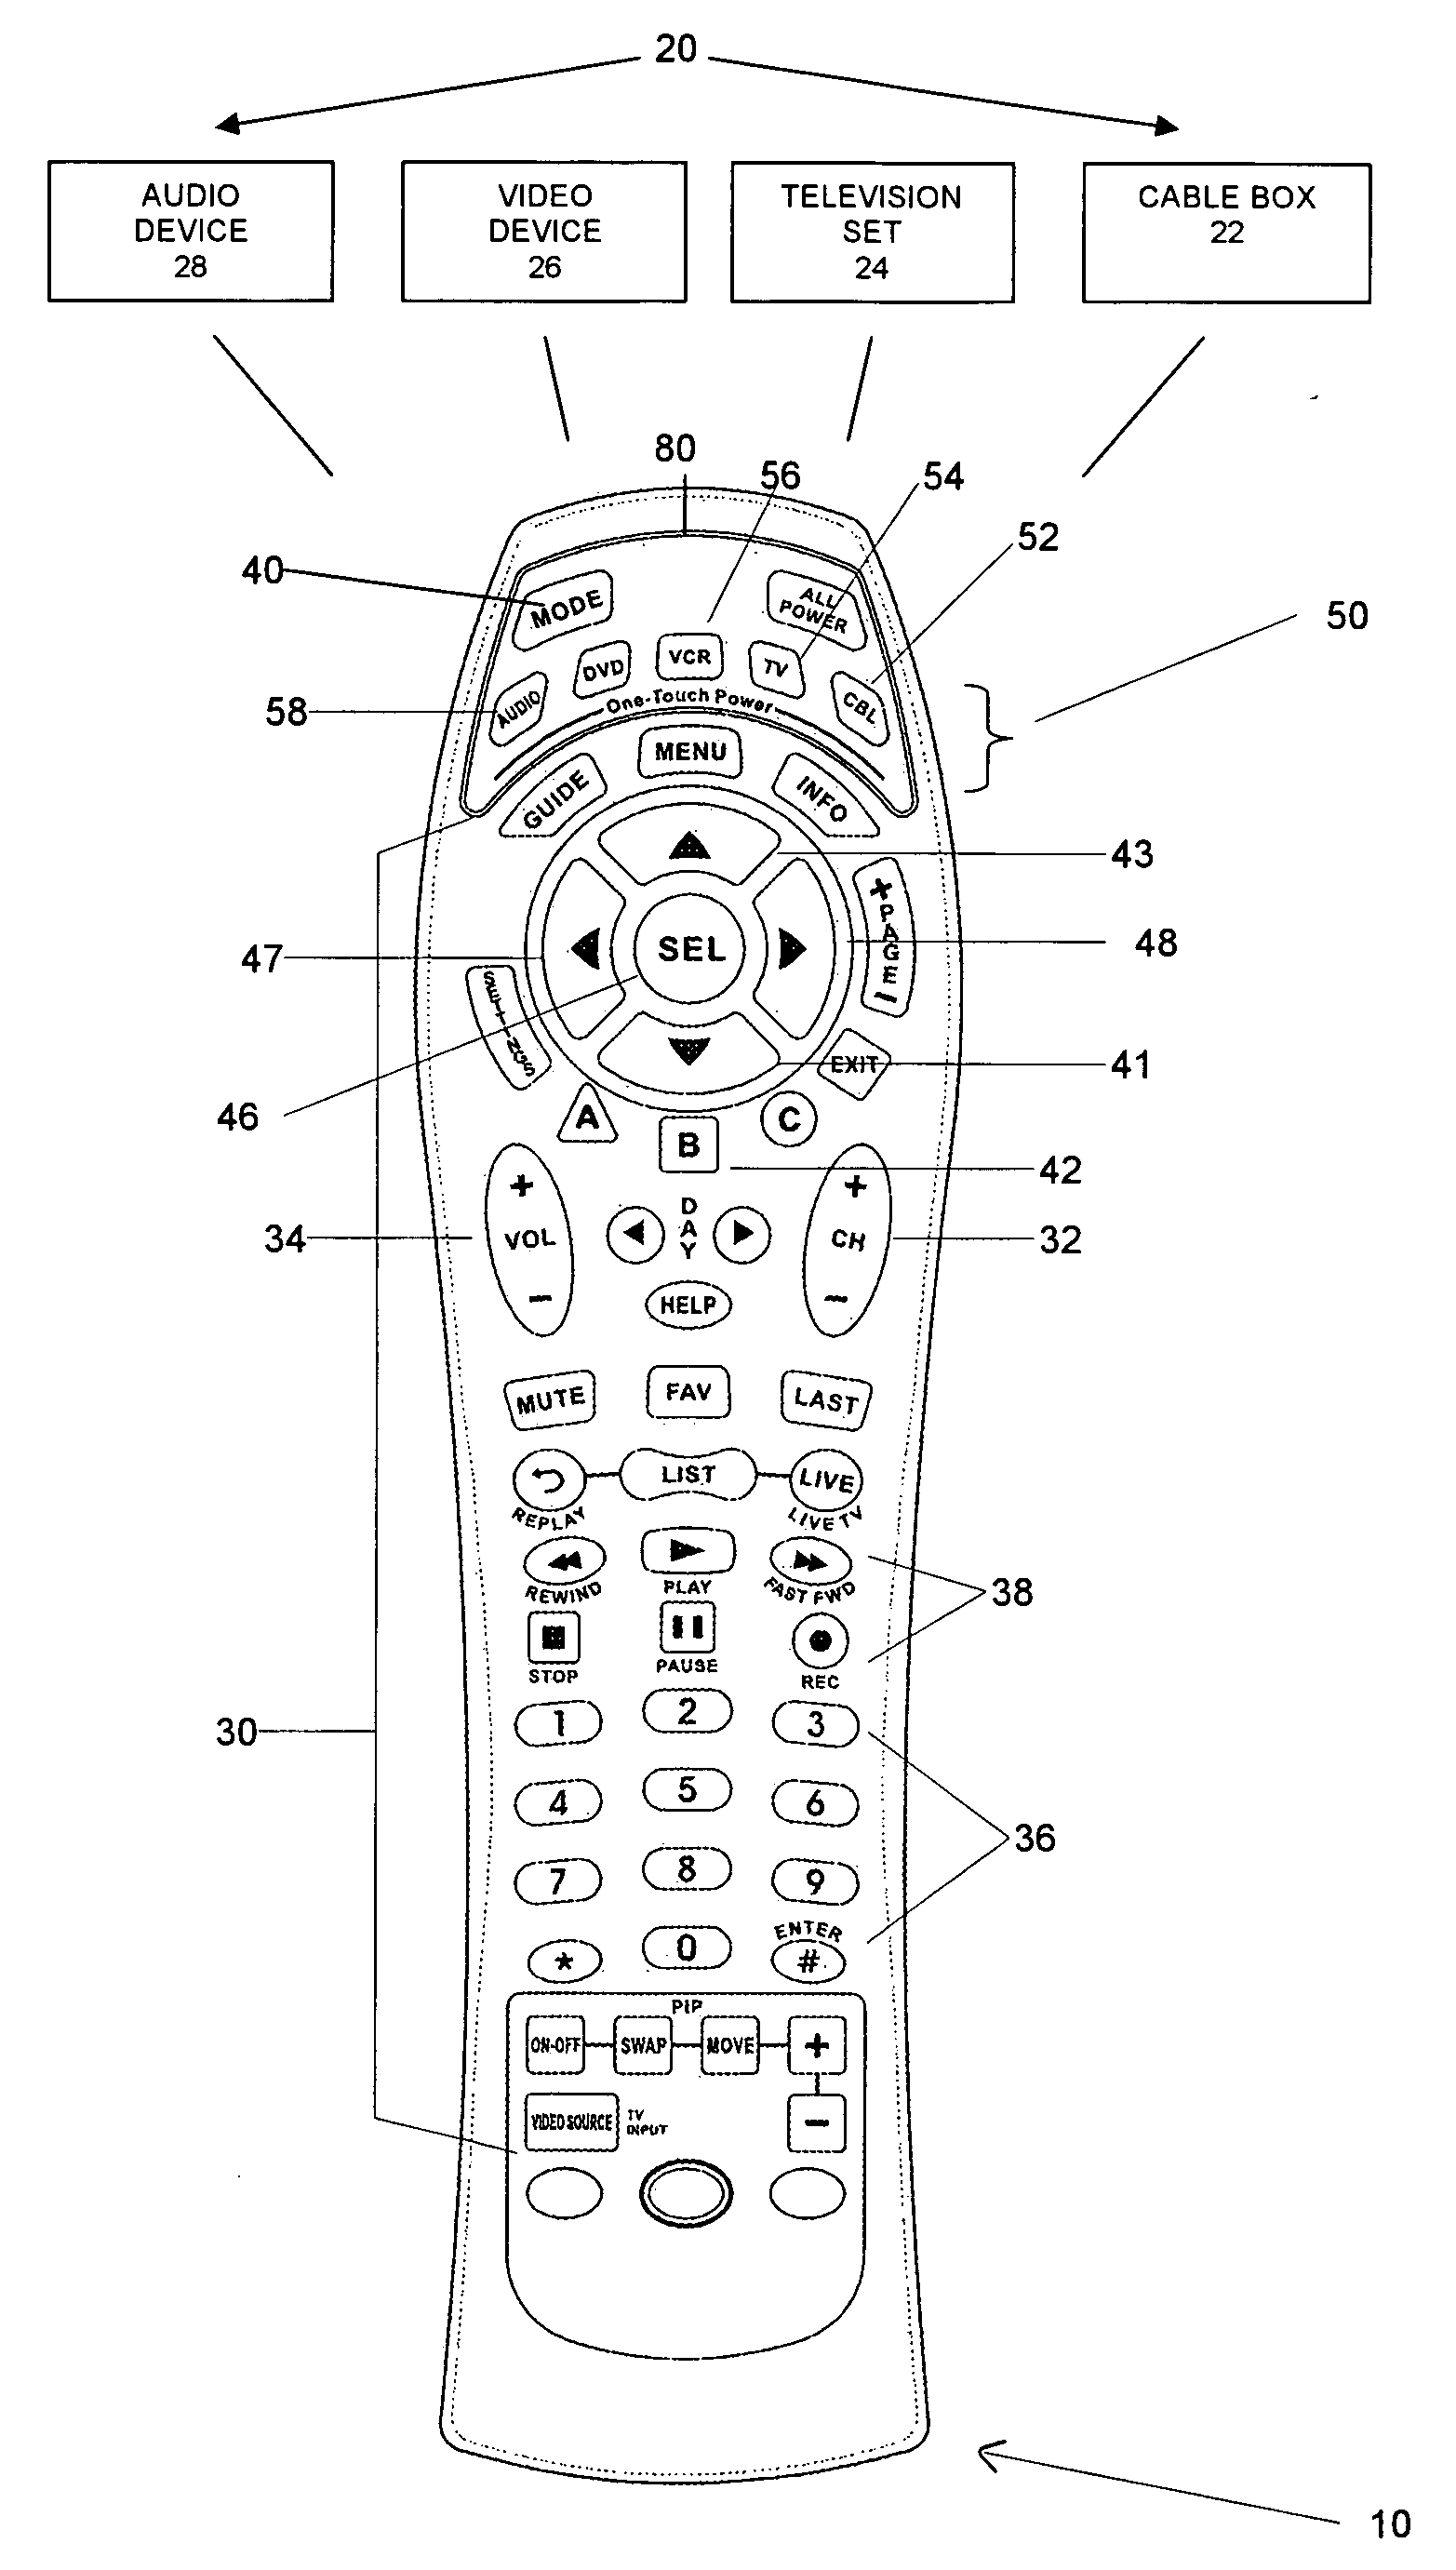 Apparatus and method for updating encoded signal information stored in a remote control unit through direct key entry